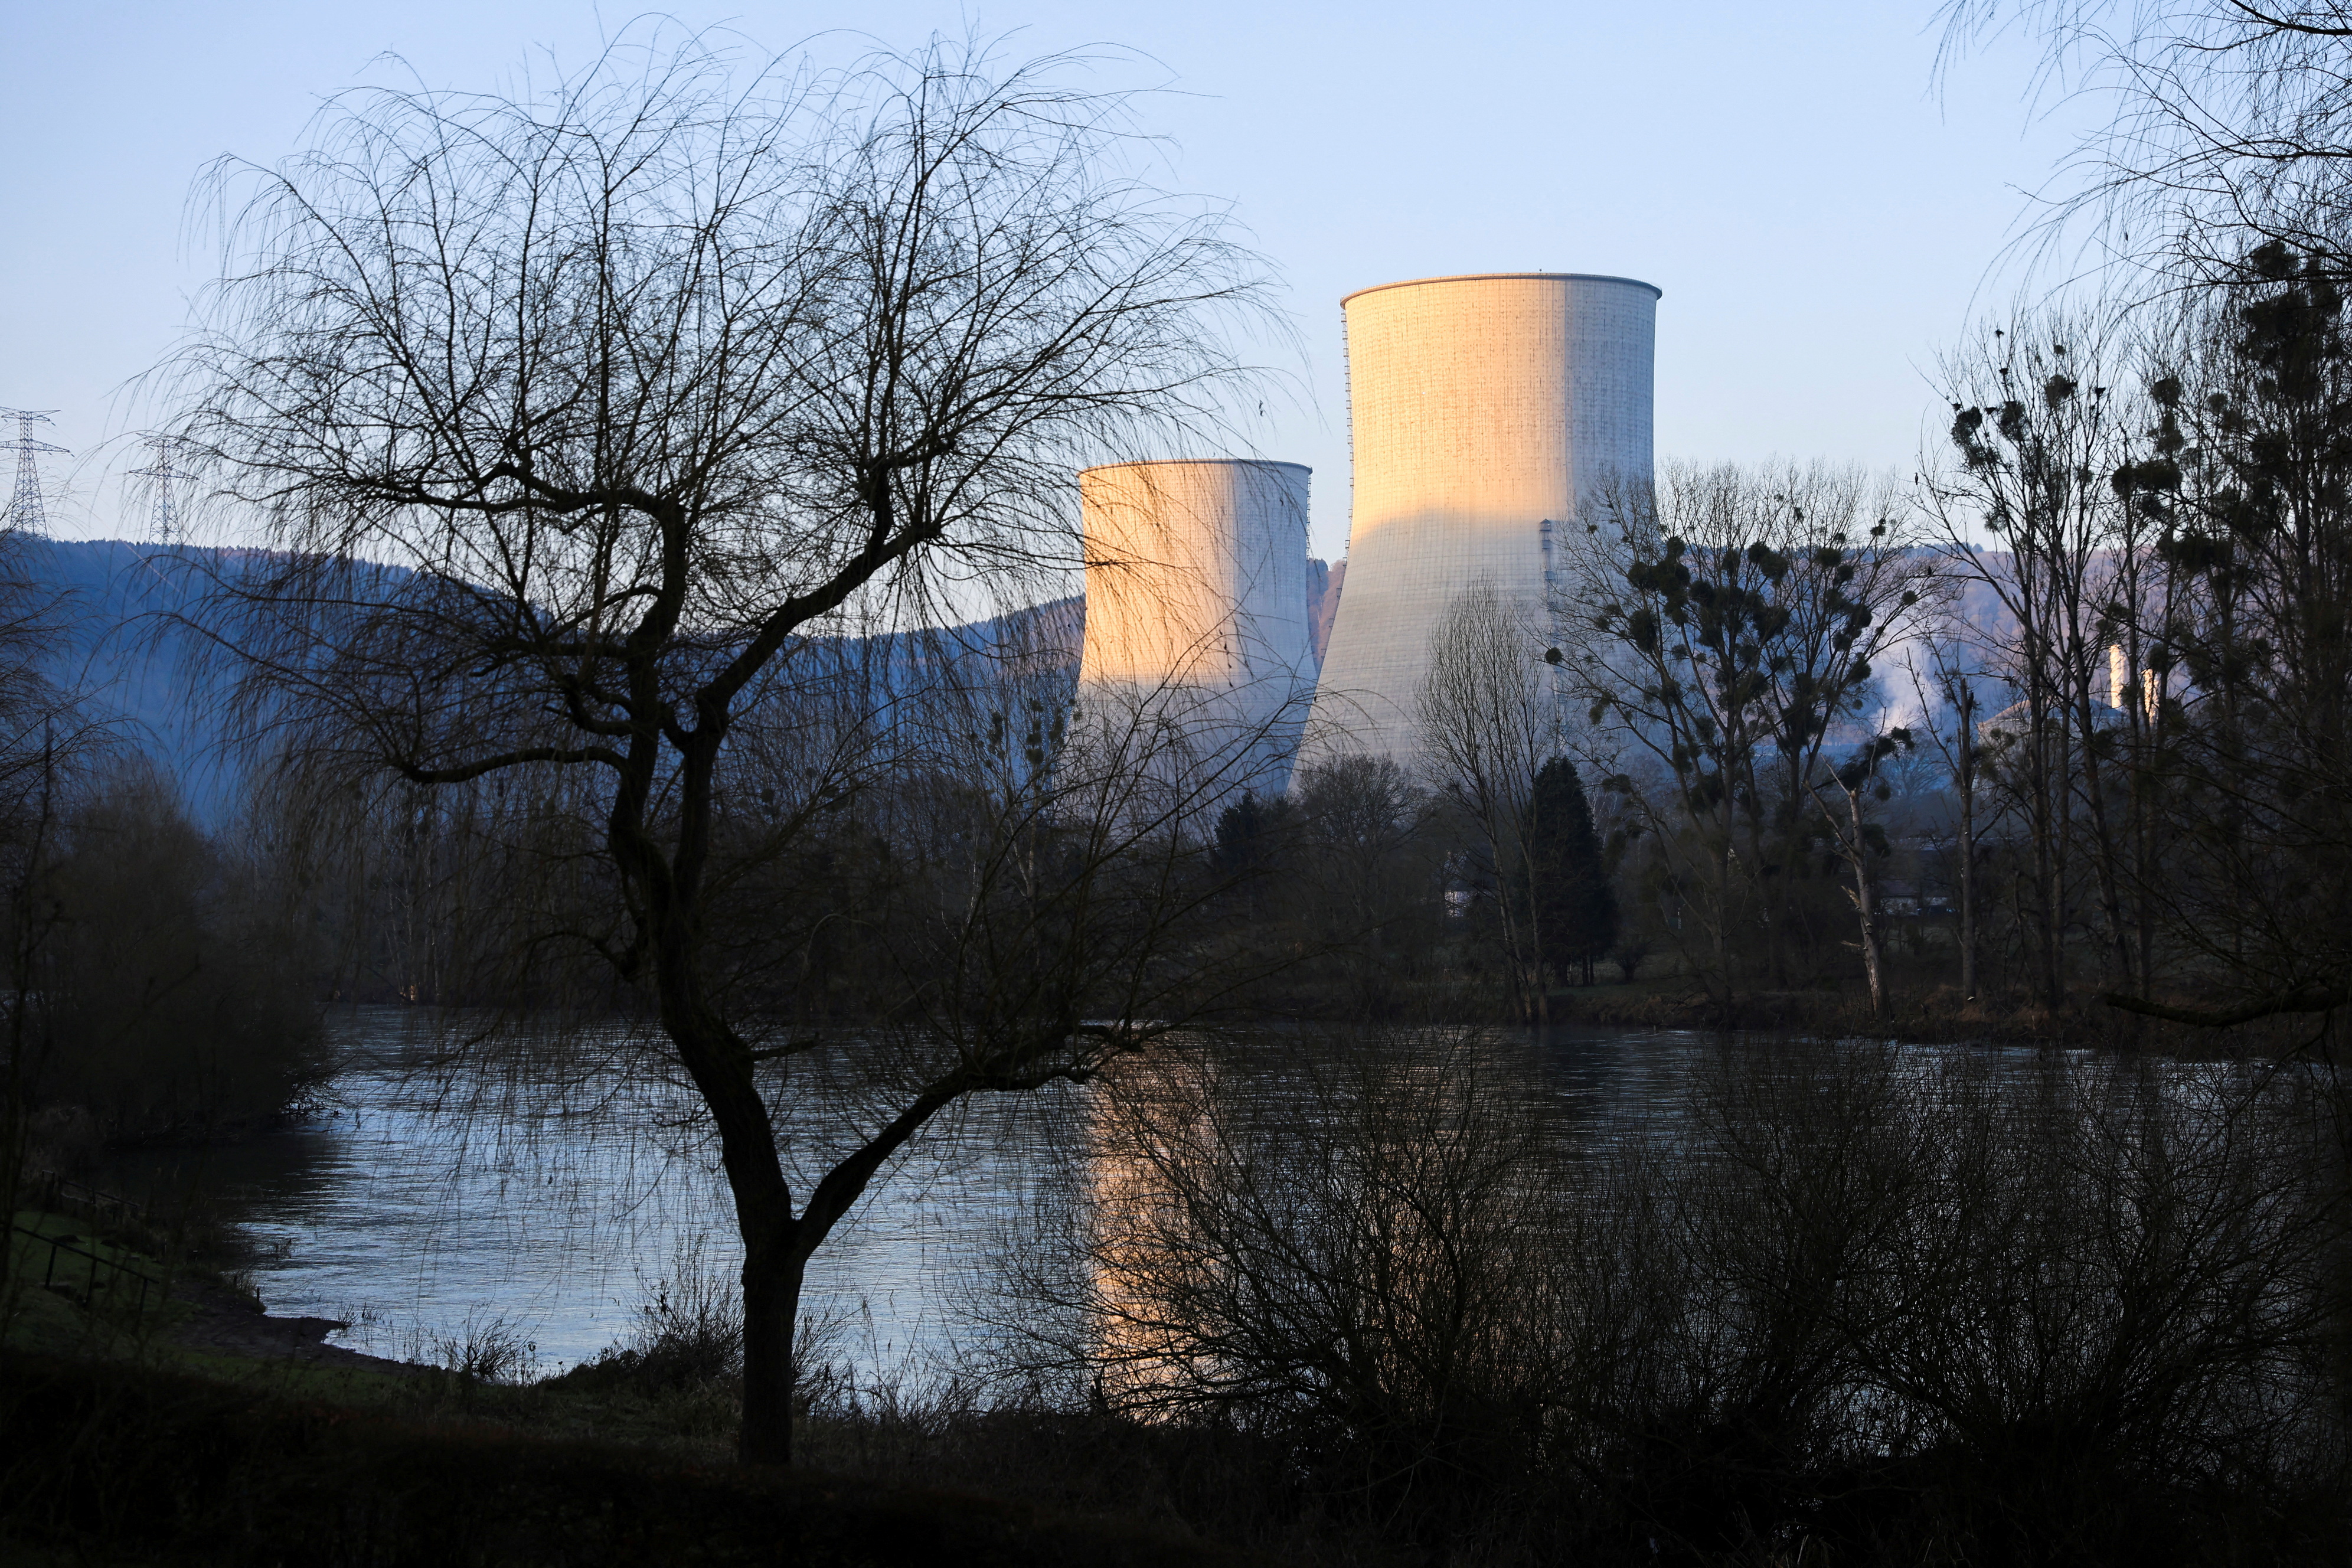 A general view of the two cooling towers of the Electricite de France (EDF) nuclear power plant, in Chooz